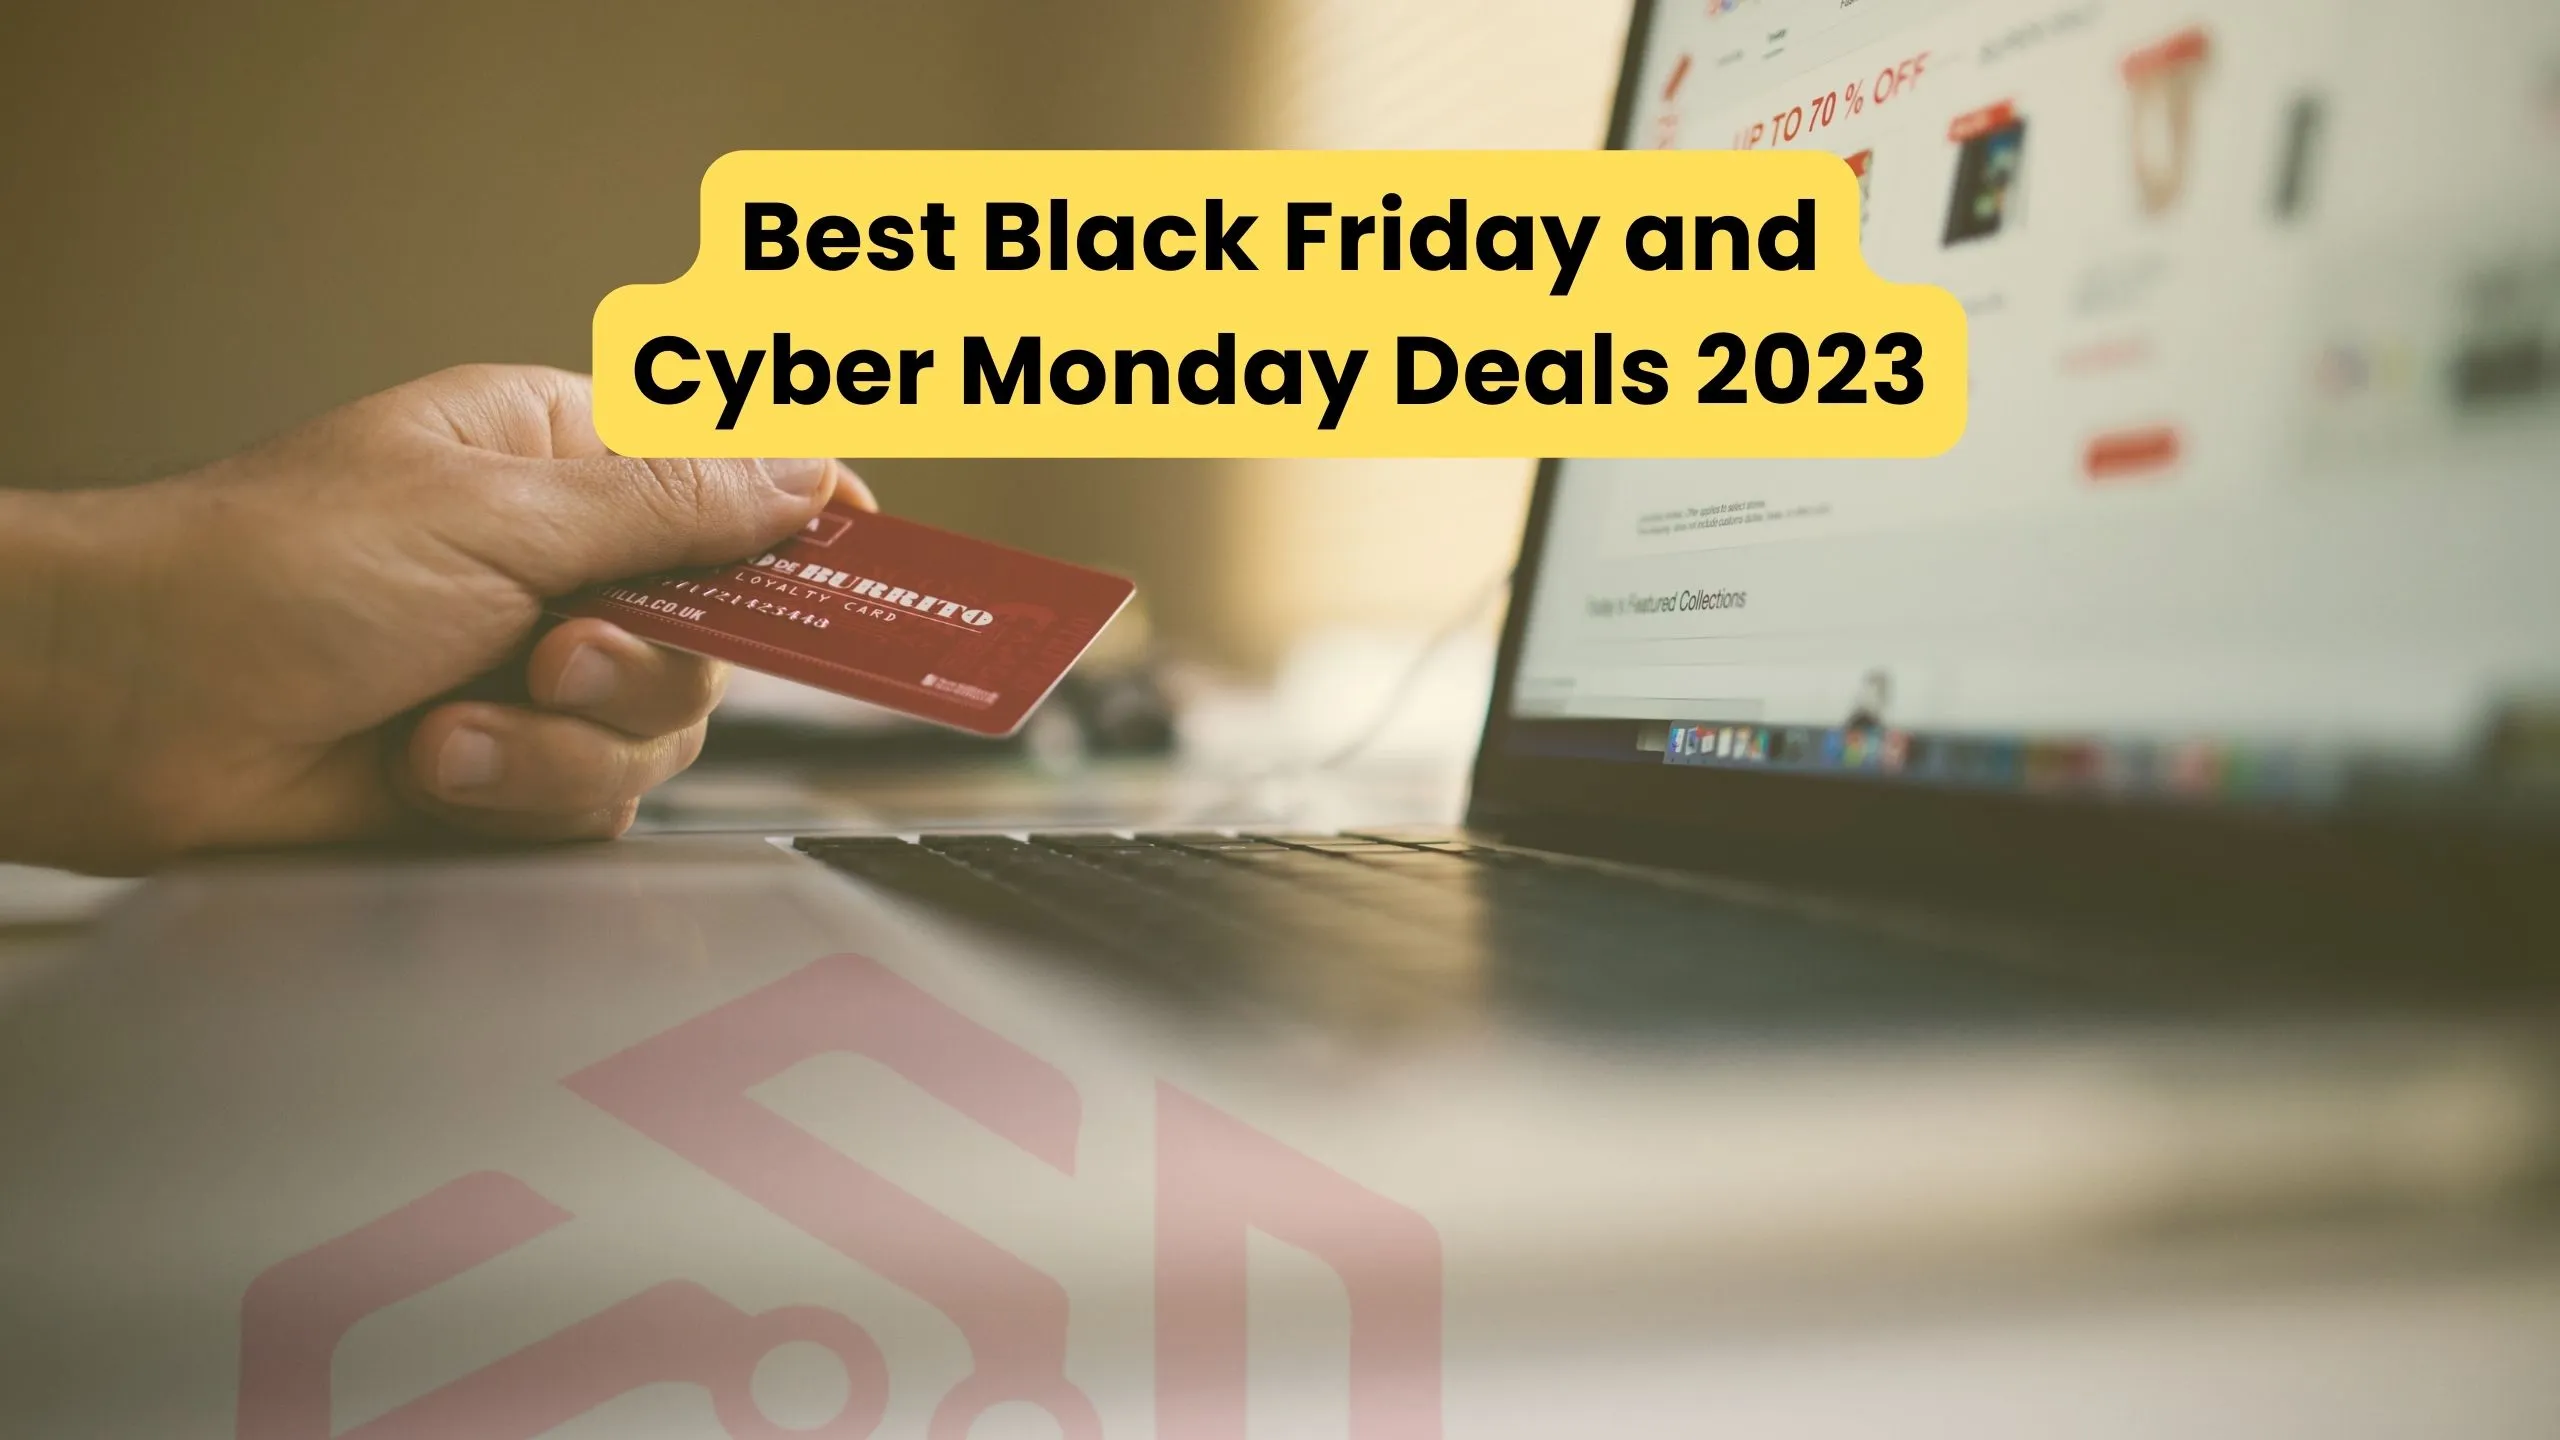 Best Black Friday and Cyber Monday Deals 2023